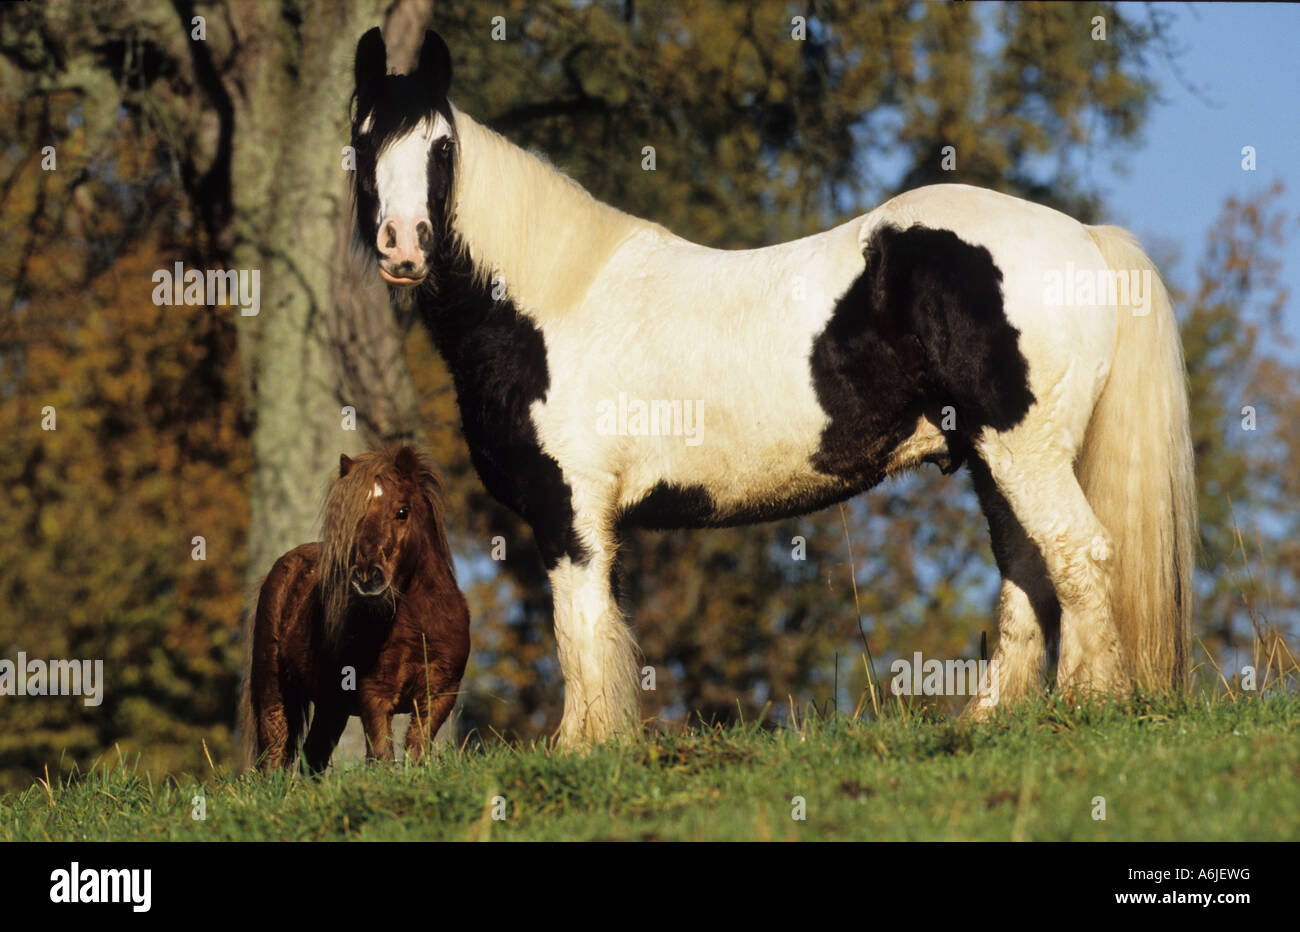 Gypsy Vanner Horse (Equus caballus). Pinto stallion with its friend a Miniature Shetland Pony gelding Stock Photo